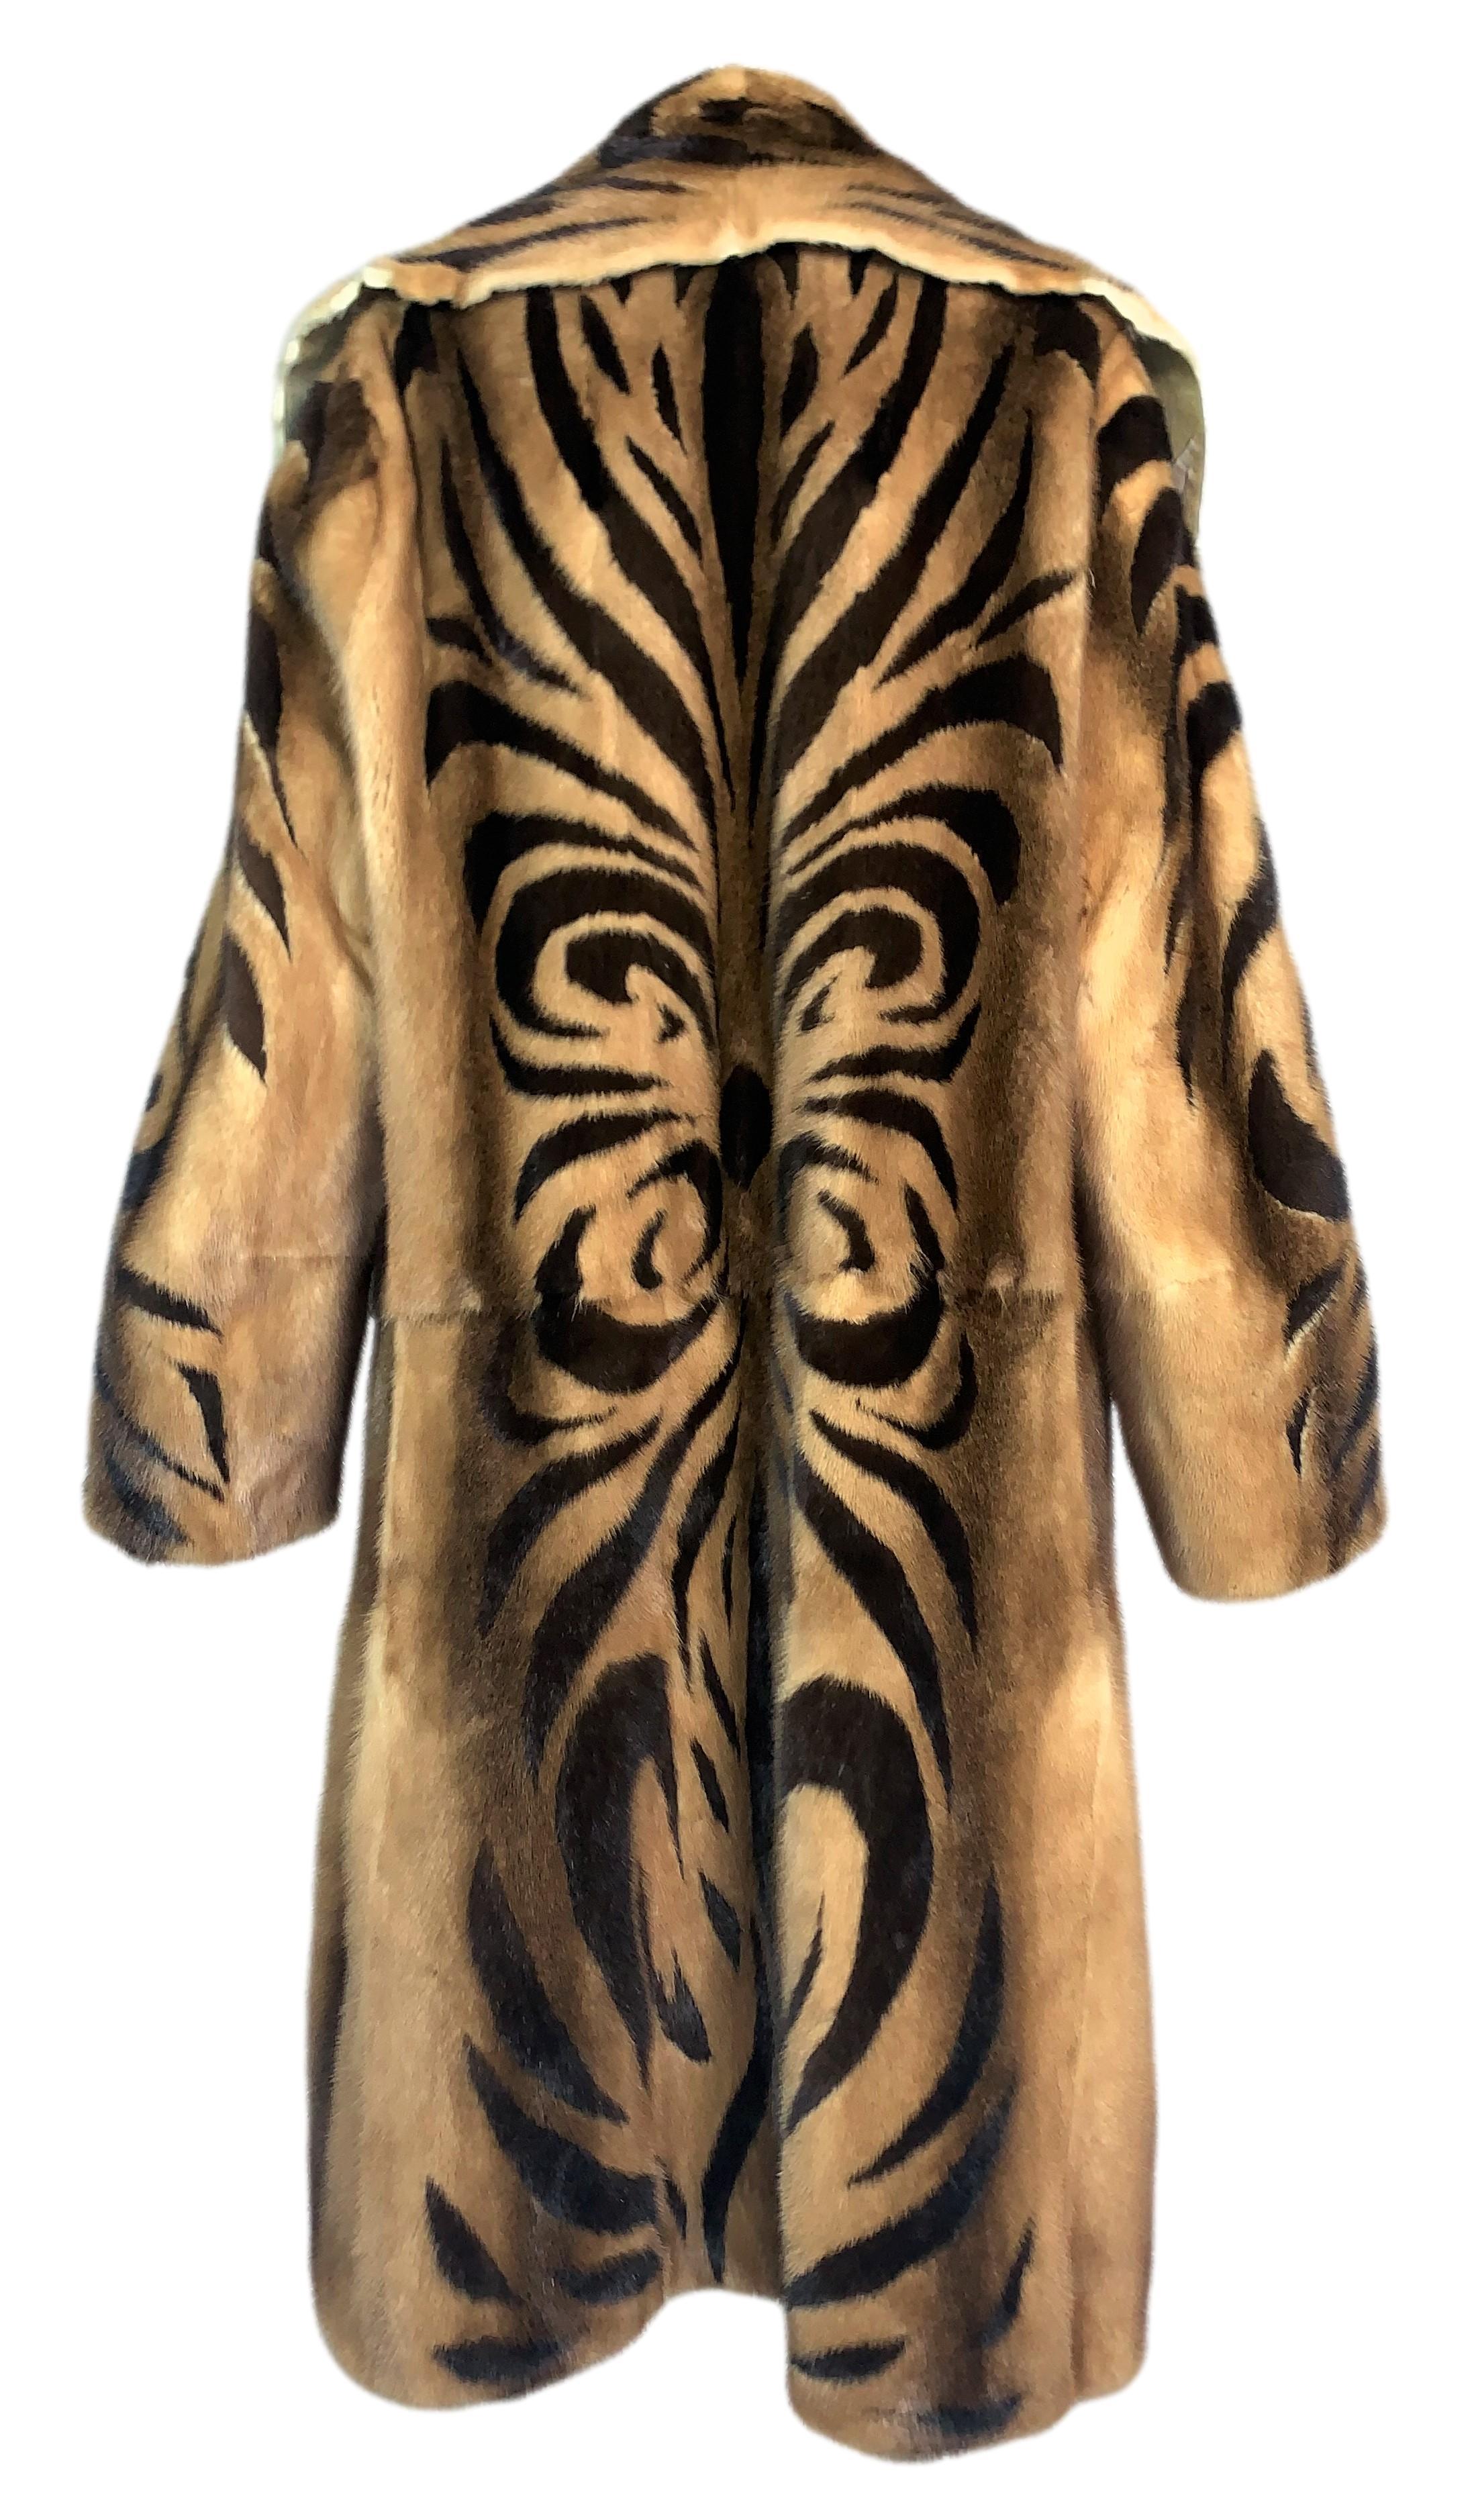 DESIGNER: F/W 1999 Roberto Cavalli

Please contact us for more images and/or information.

CONDITION: Good- has raw edges on the collar and open front

FABRIC: Mink lined in cotton

COUNTRY: Italy

SIZE: No size tag

MEASUREMENTS; provided as a